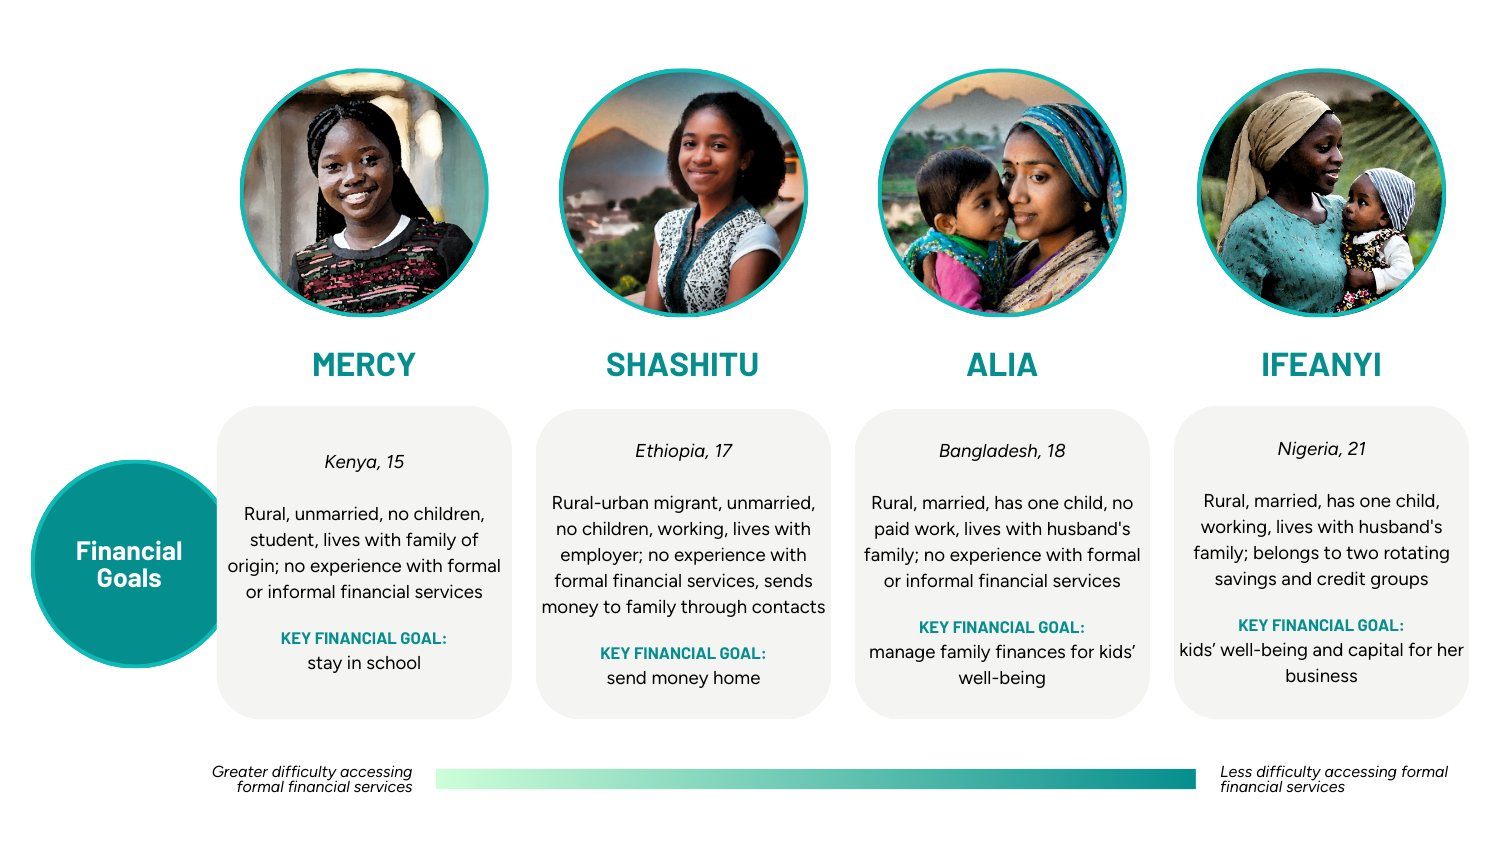 Illustrative use cases of financial services for different segments of young women